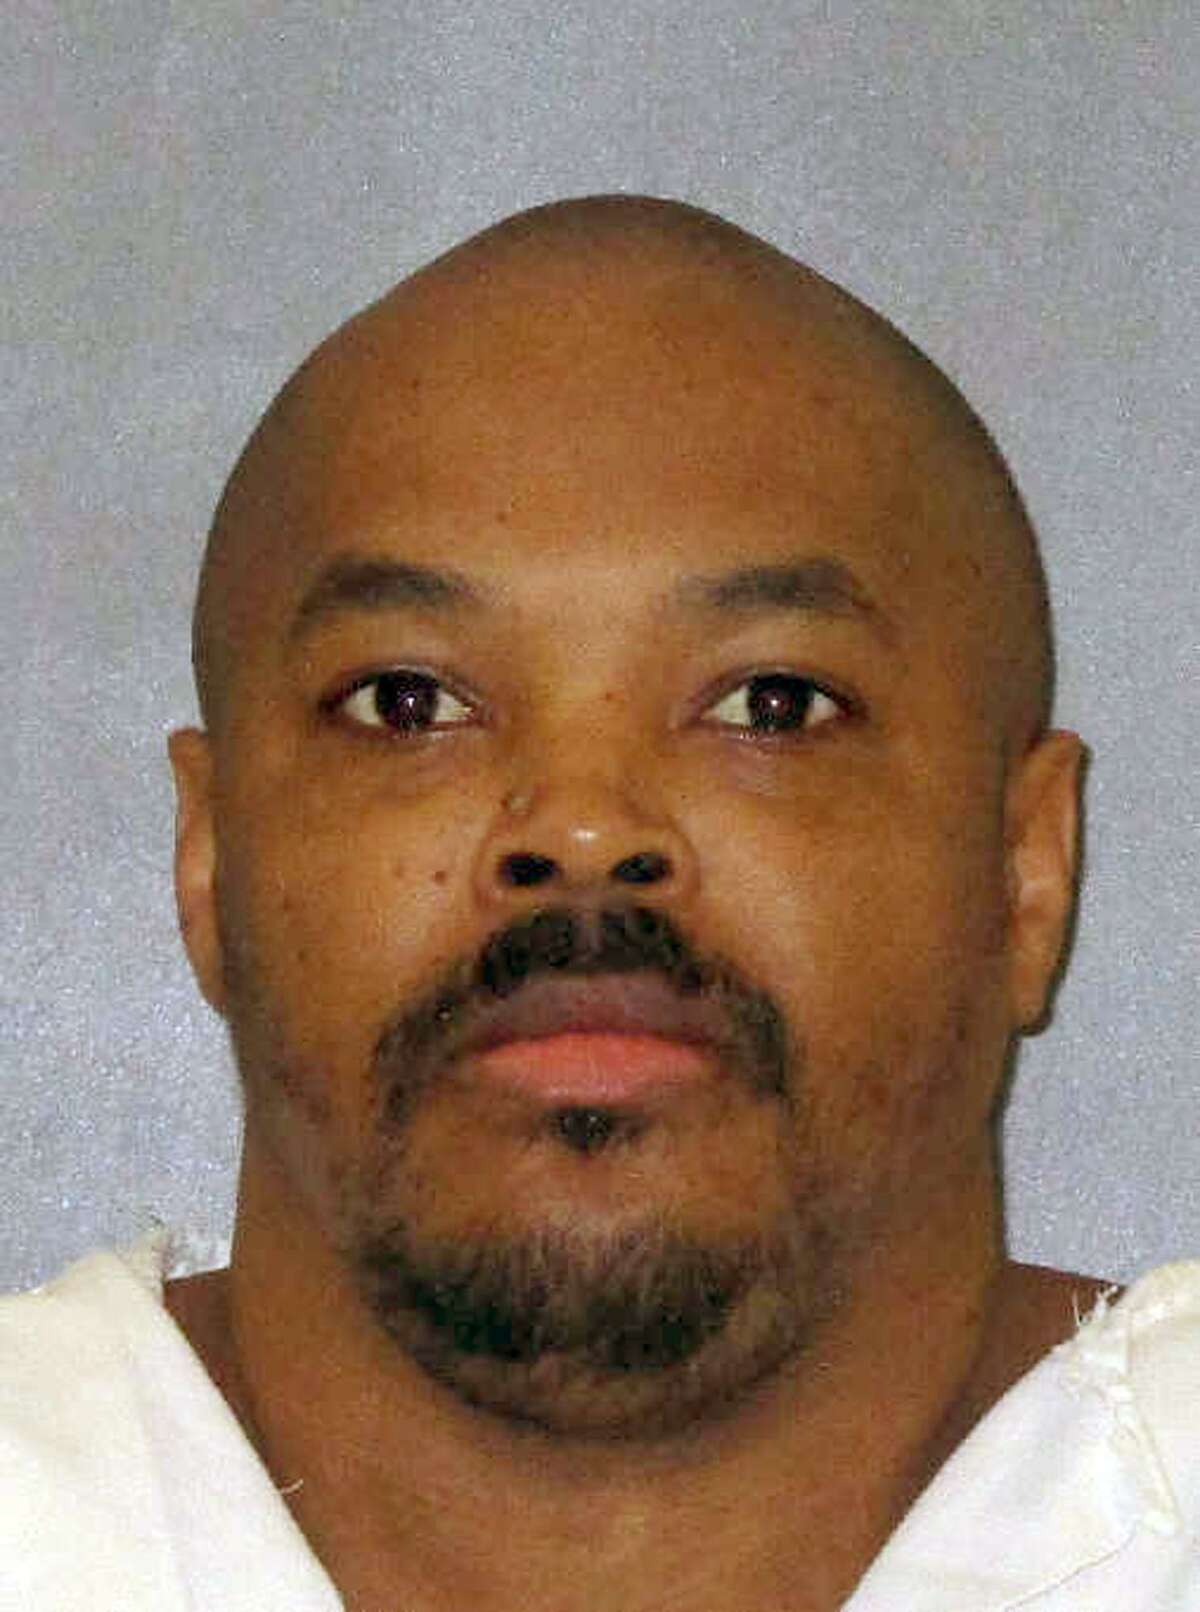 Terry Edwards, 43, got the death penalty for a 2002 fatal robbery.